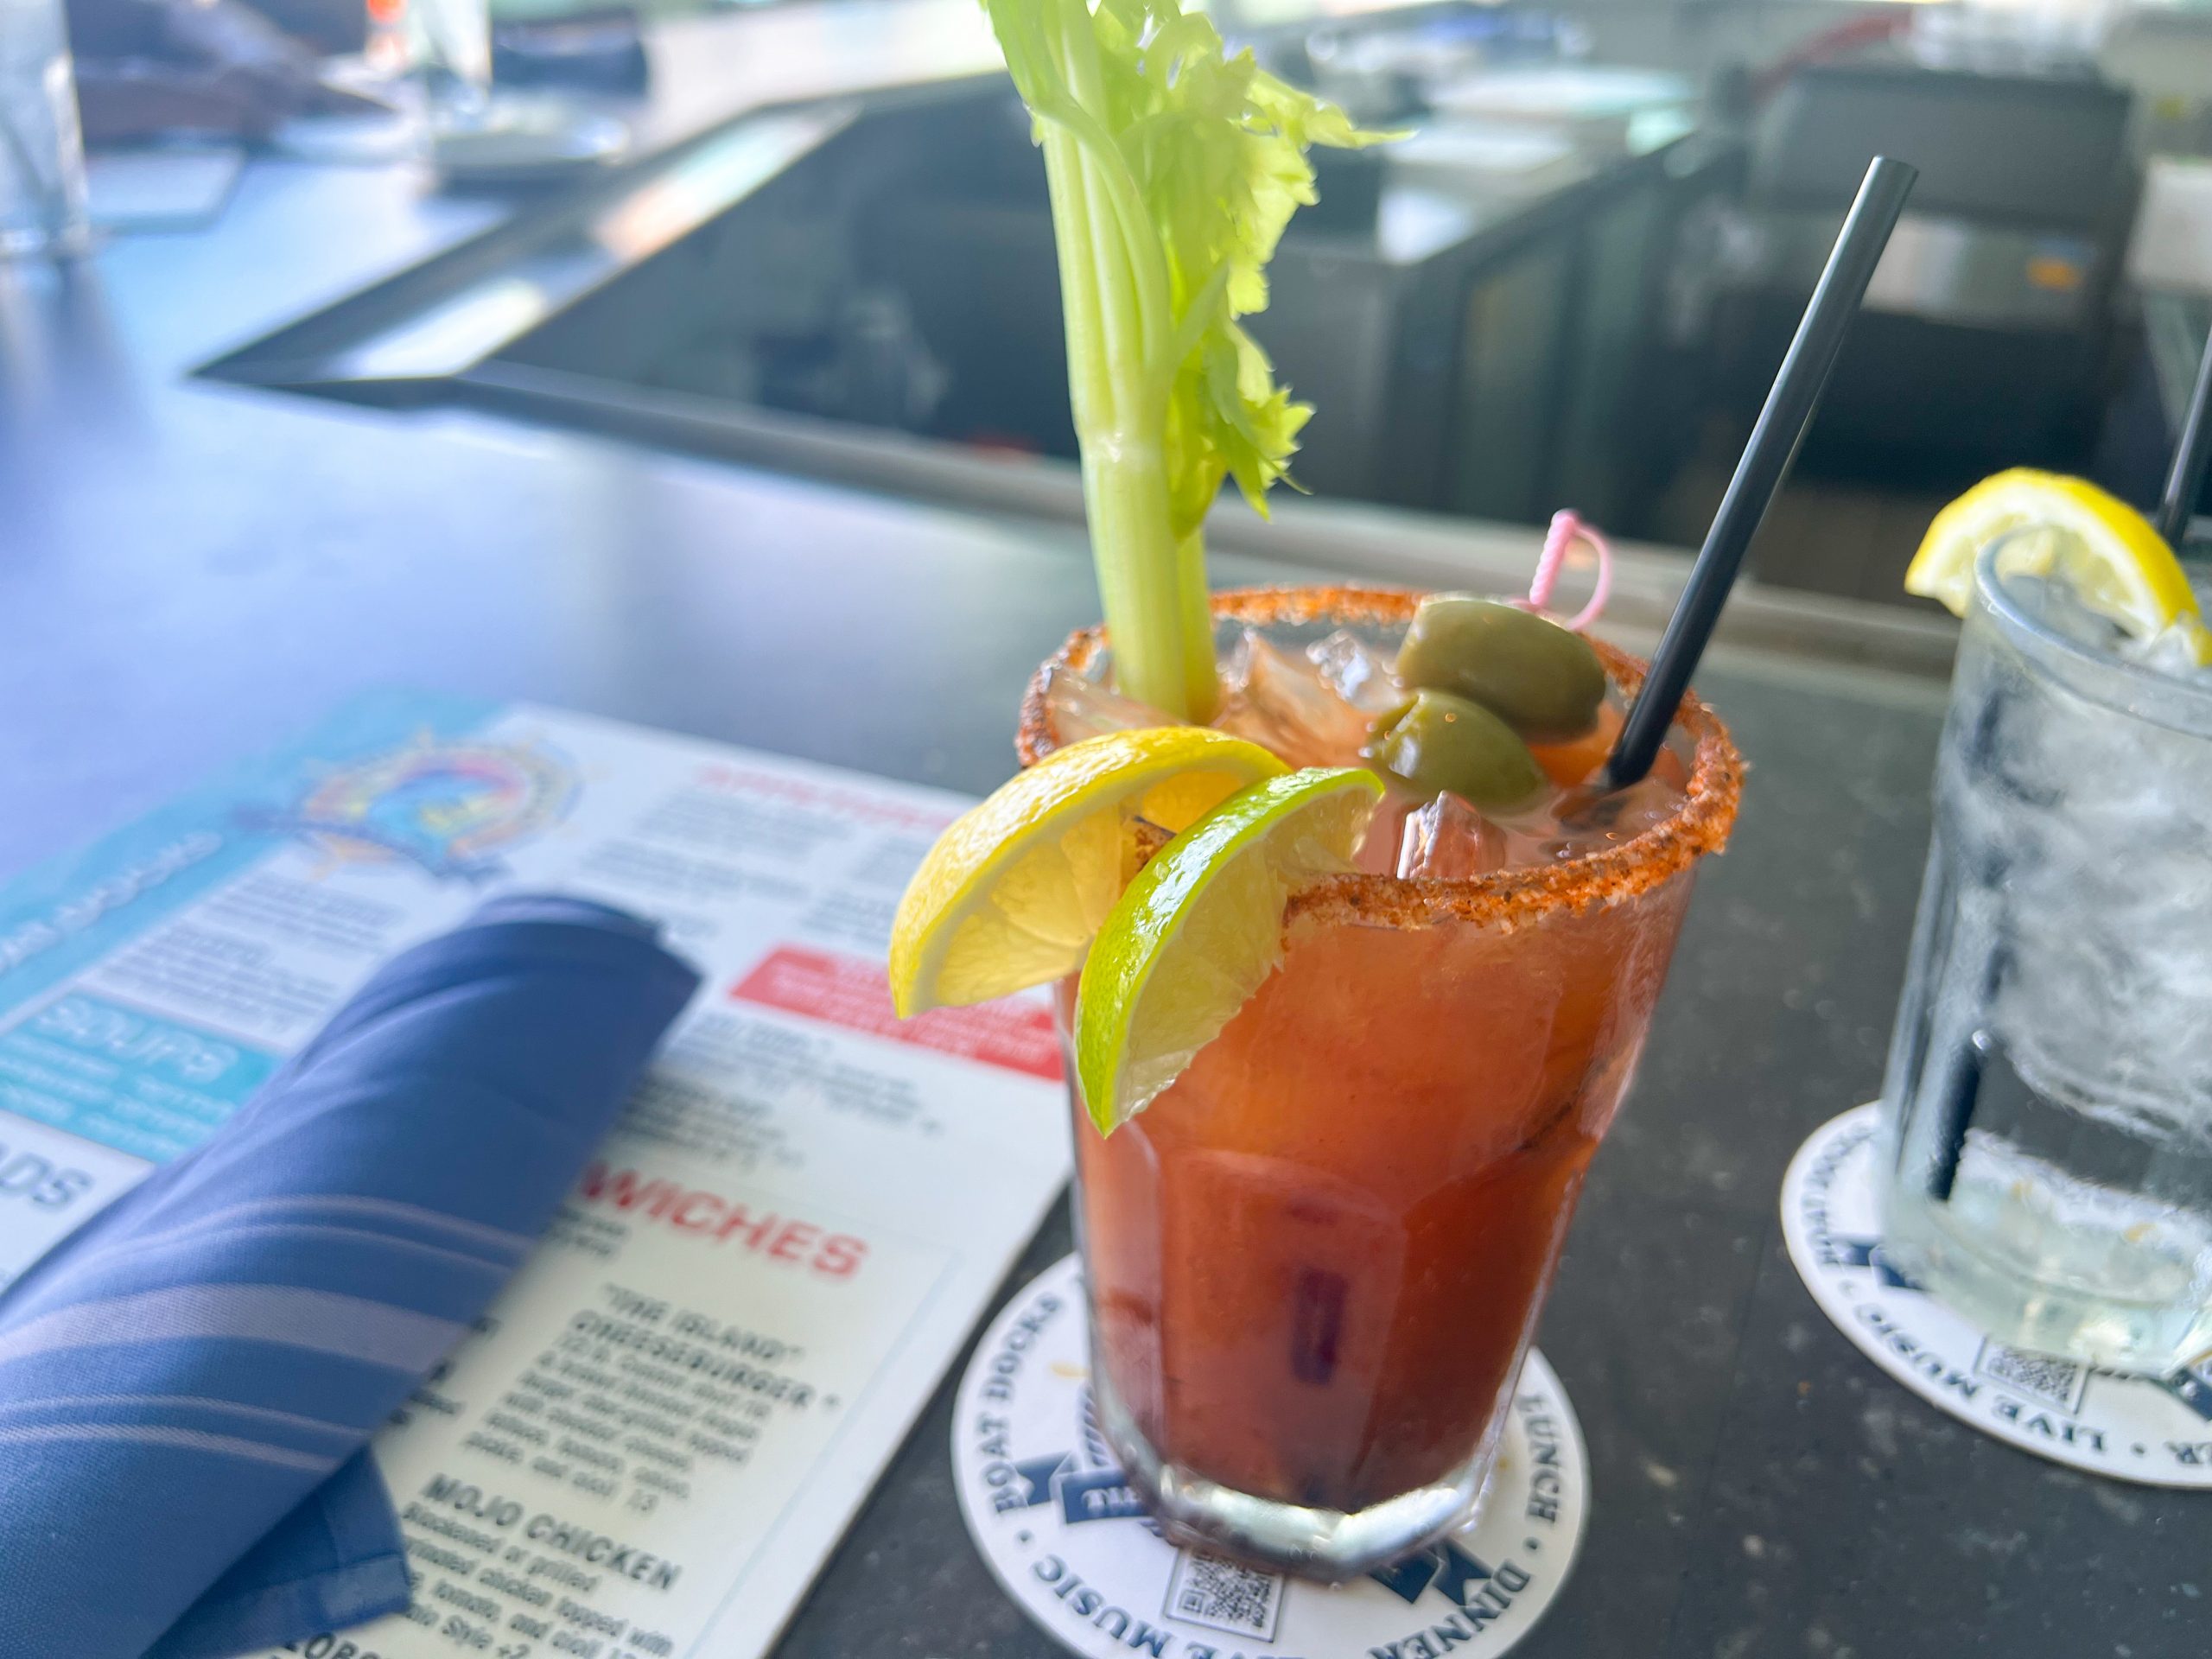 The Bloody Mary